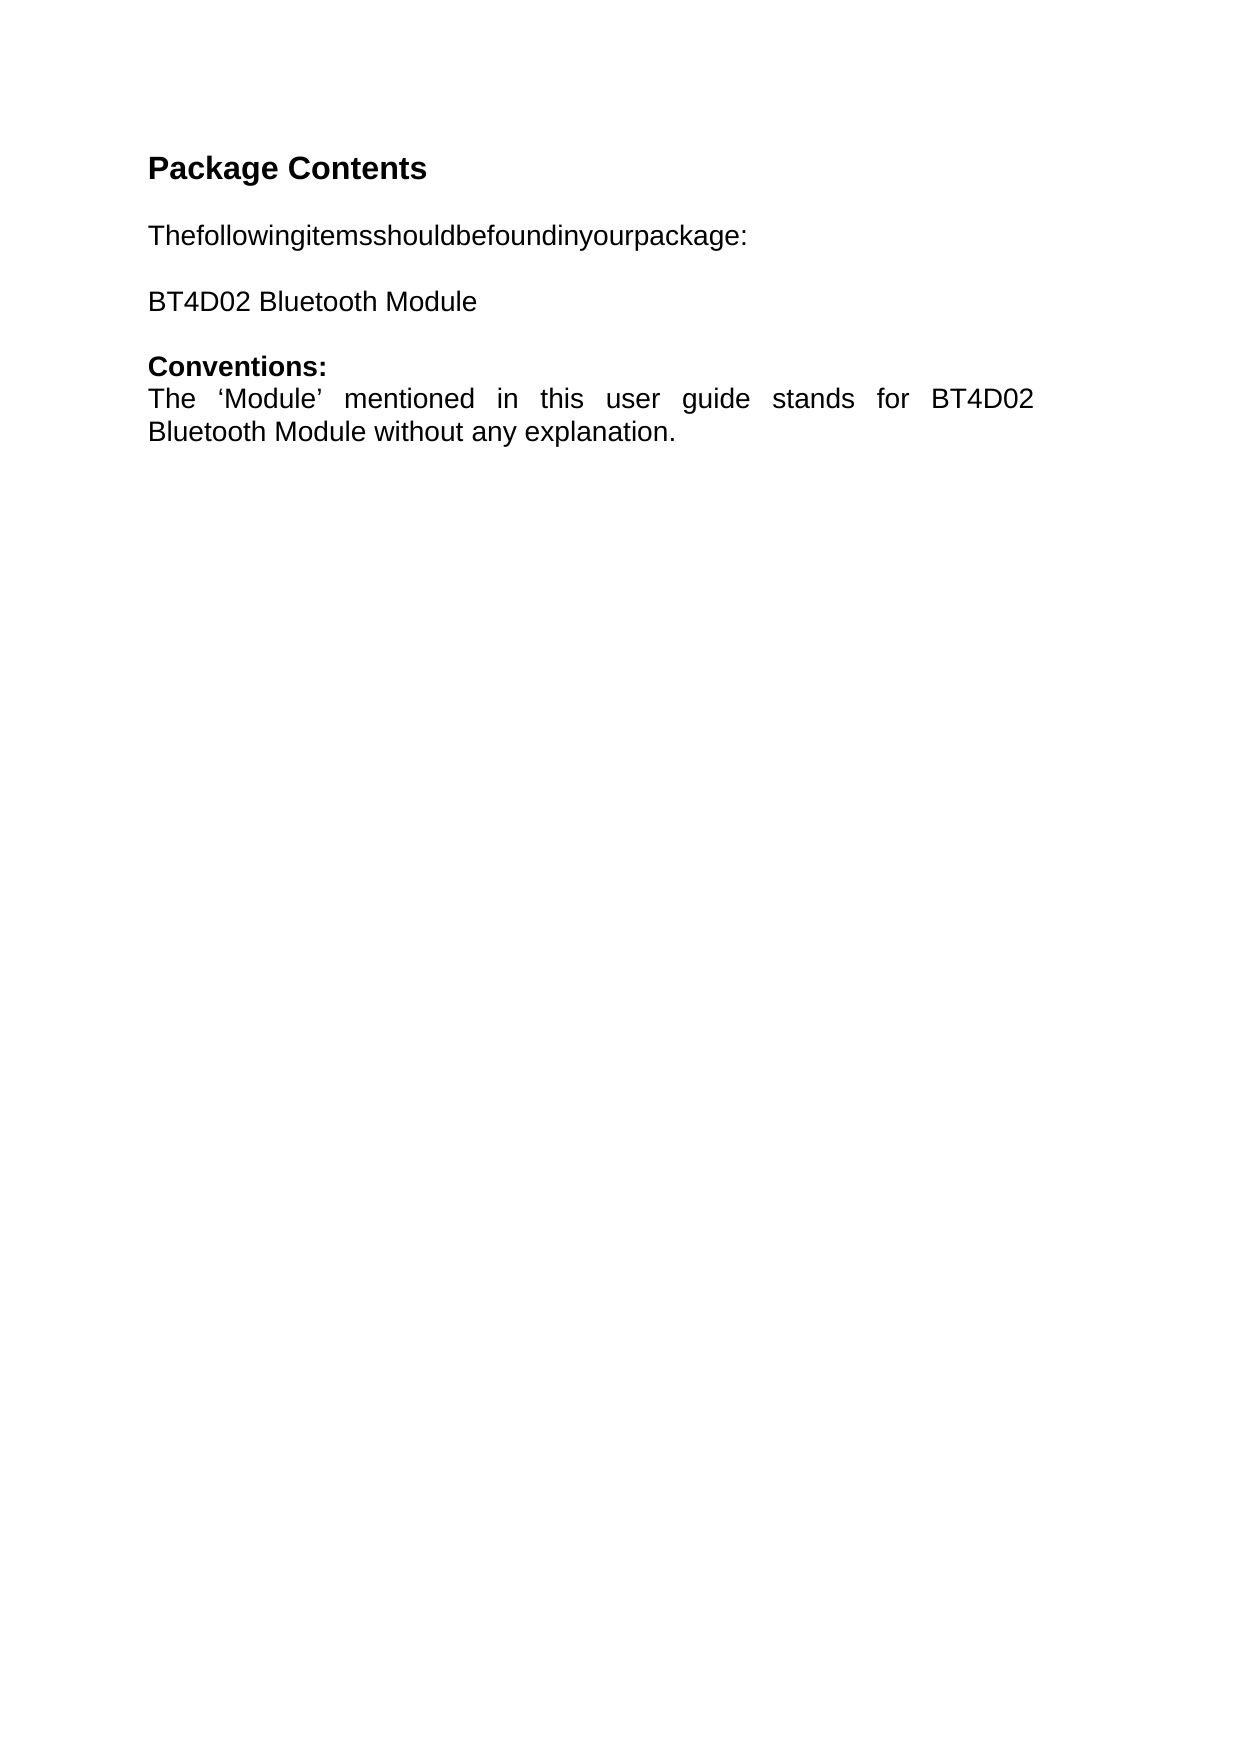   Package Contents   Thefollowingitemsshouldbefoundinyourpackage:   BT4D02 Bluetooth Module   Conventions:   The ‘Module’ mentioned in this user guide stands for BT4D02 Bluetooth Module without any explanation.                                      